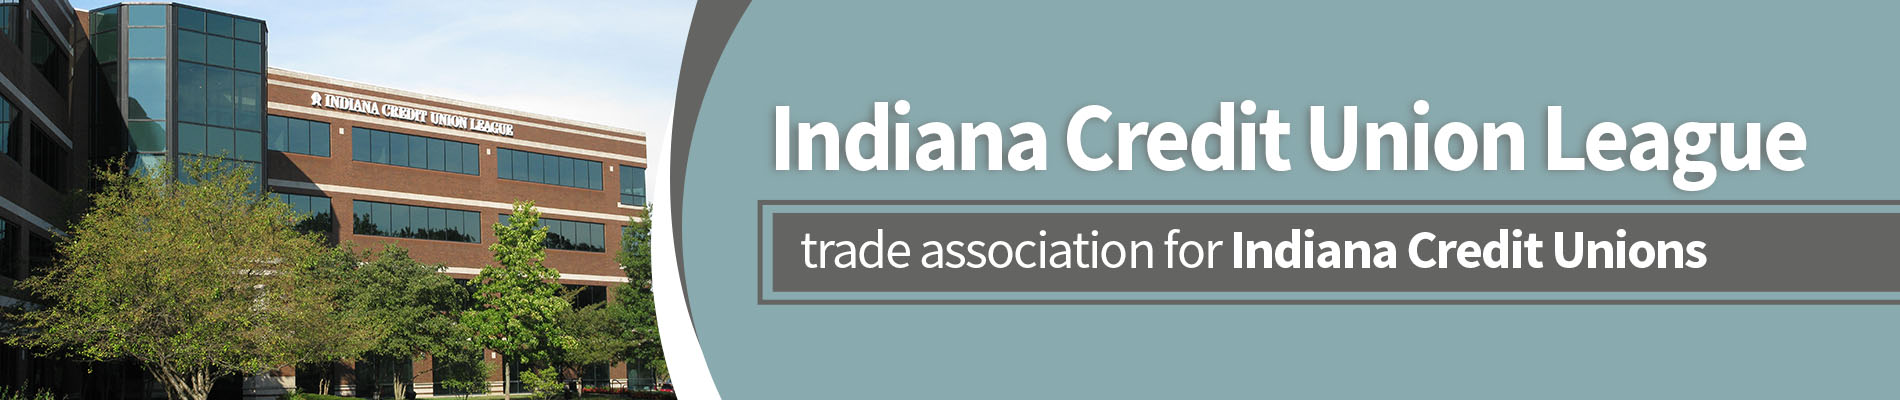 ICULWebScroll-tradeassociationforcreditunions